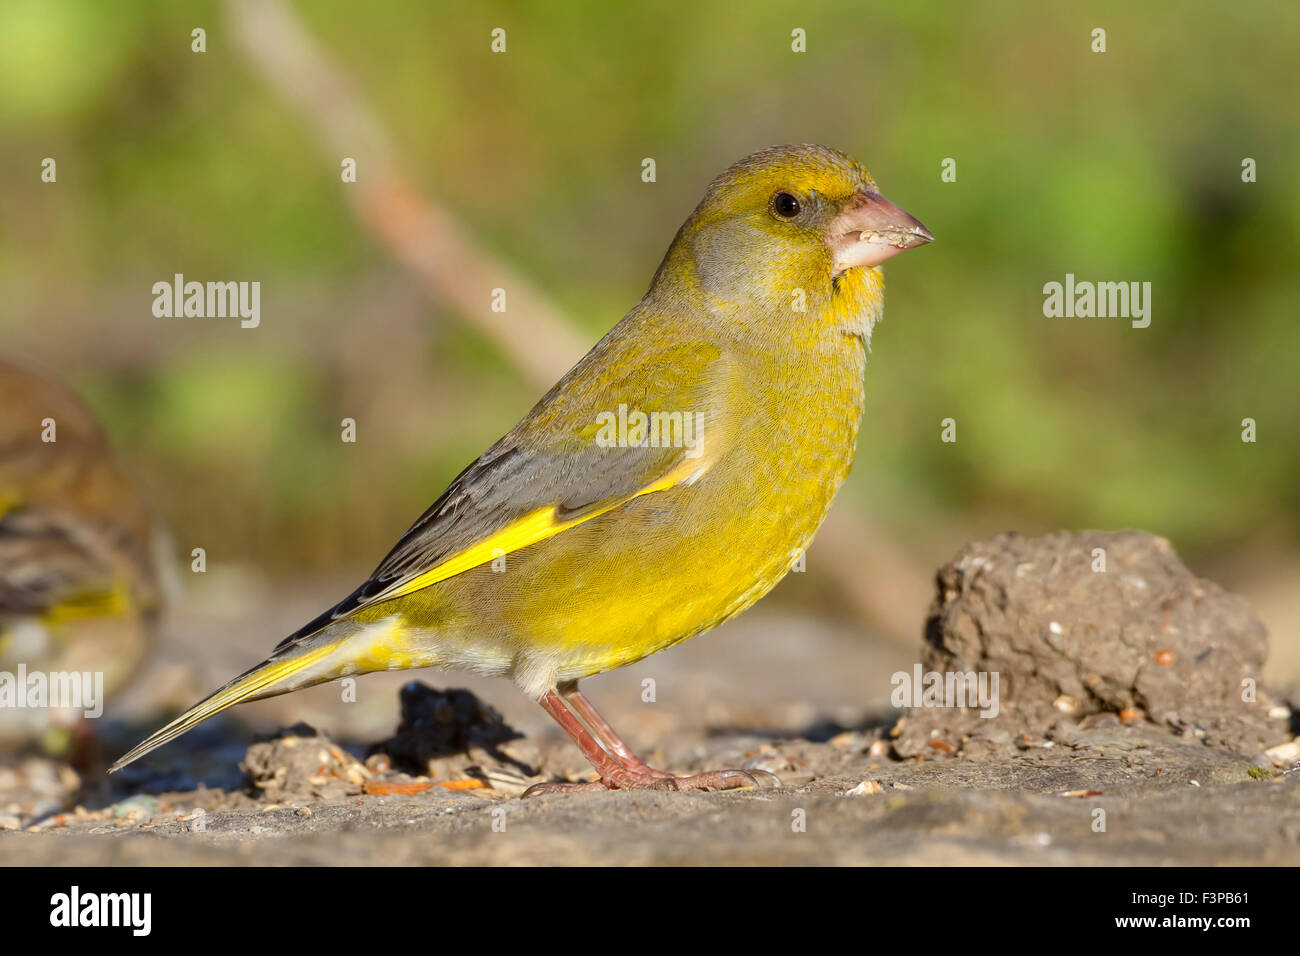 European Greenfinch, Male standing on the ground, Campania, Italy (Carduelis chloris) Stock Photo